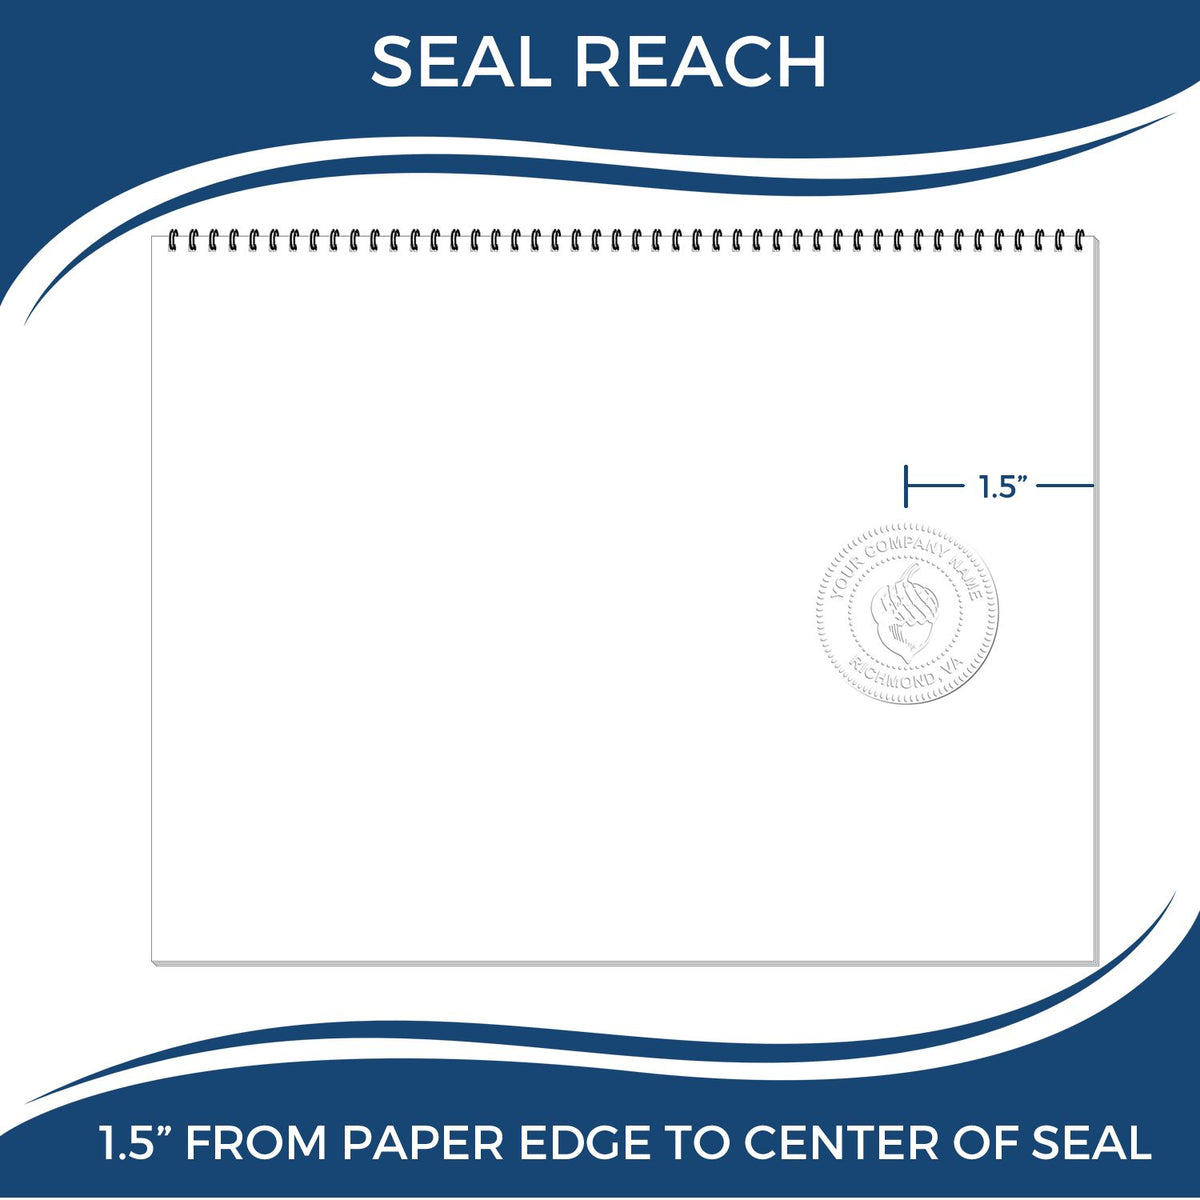 An infographic showing the seal reach which is represented by a ruler and a miniature seal image of the Tennessee Geologist Desk Seal